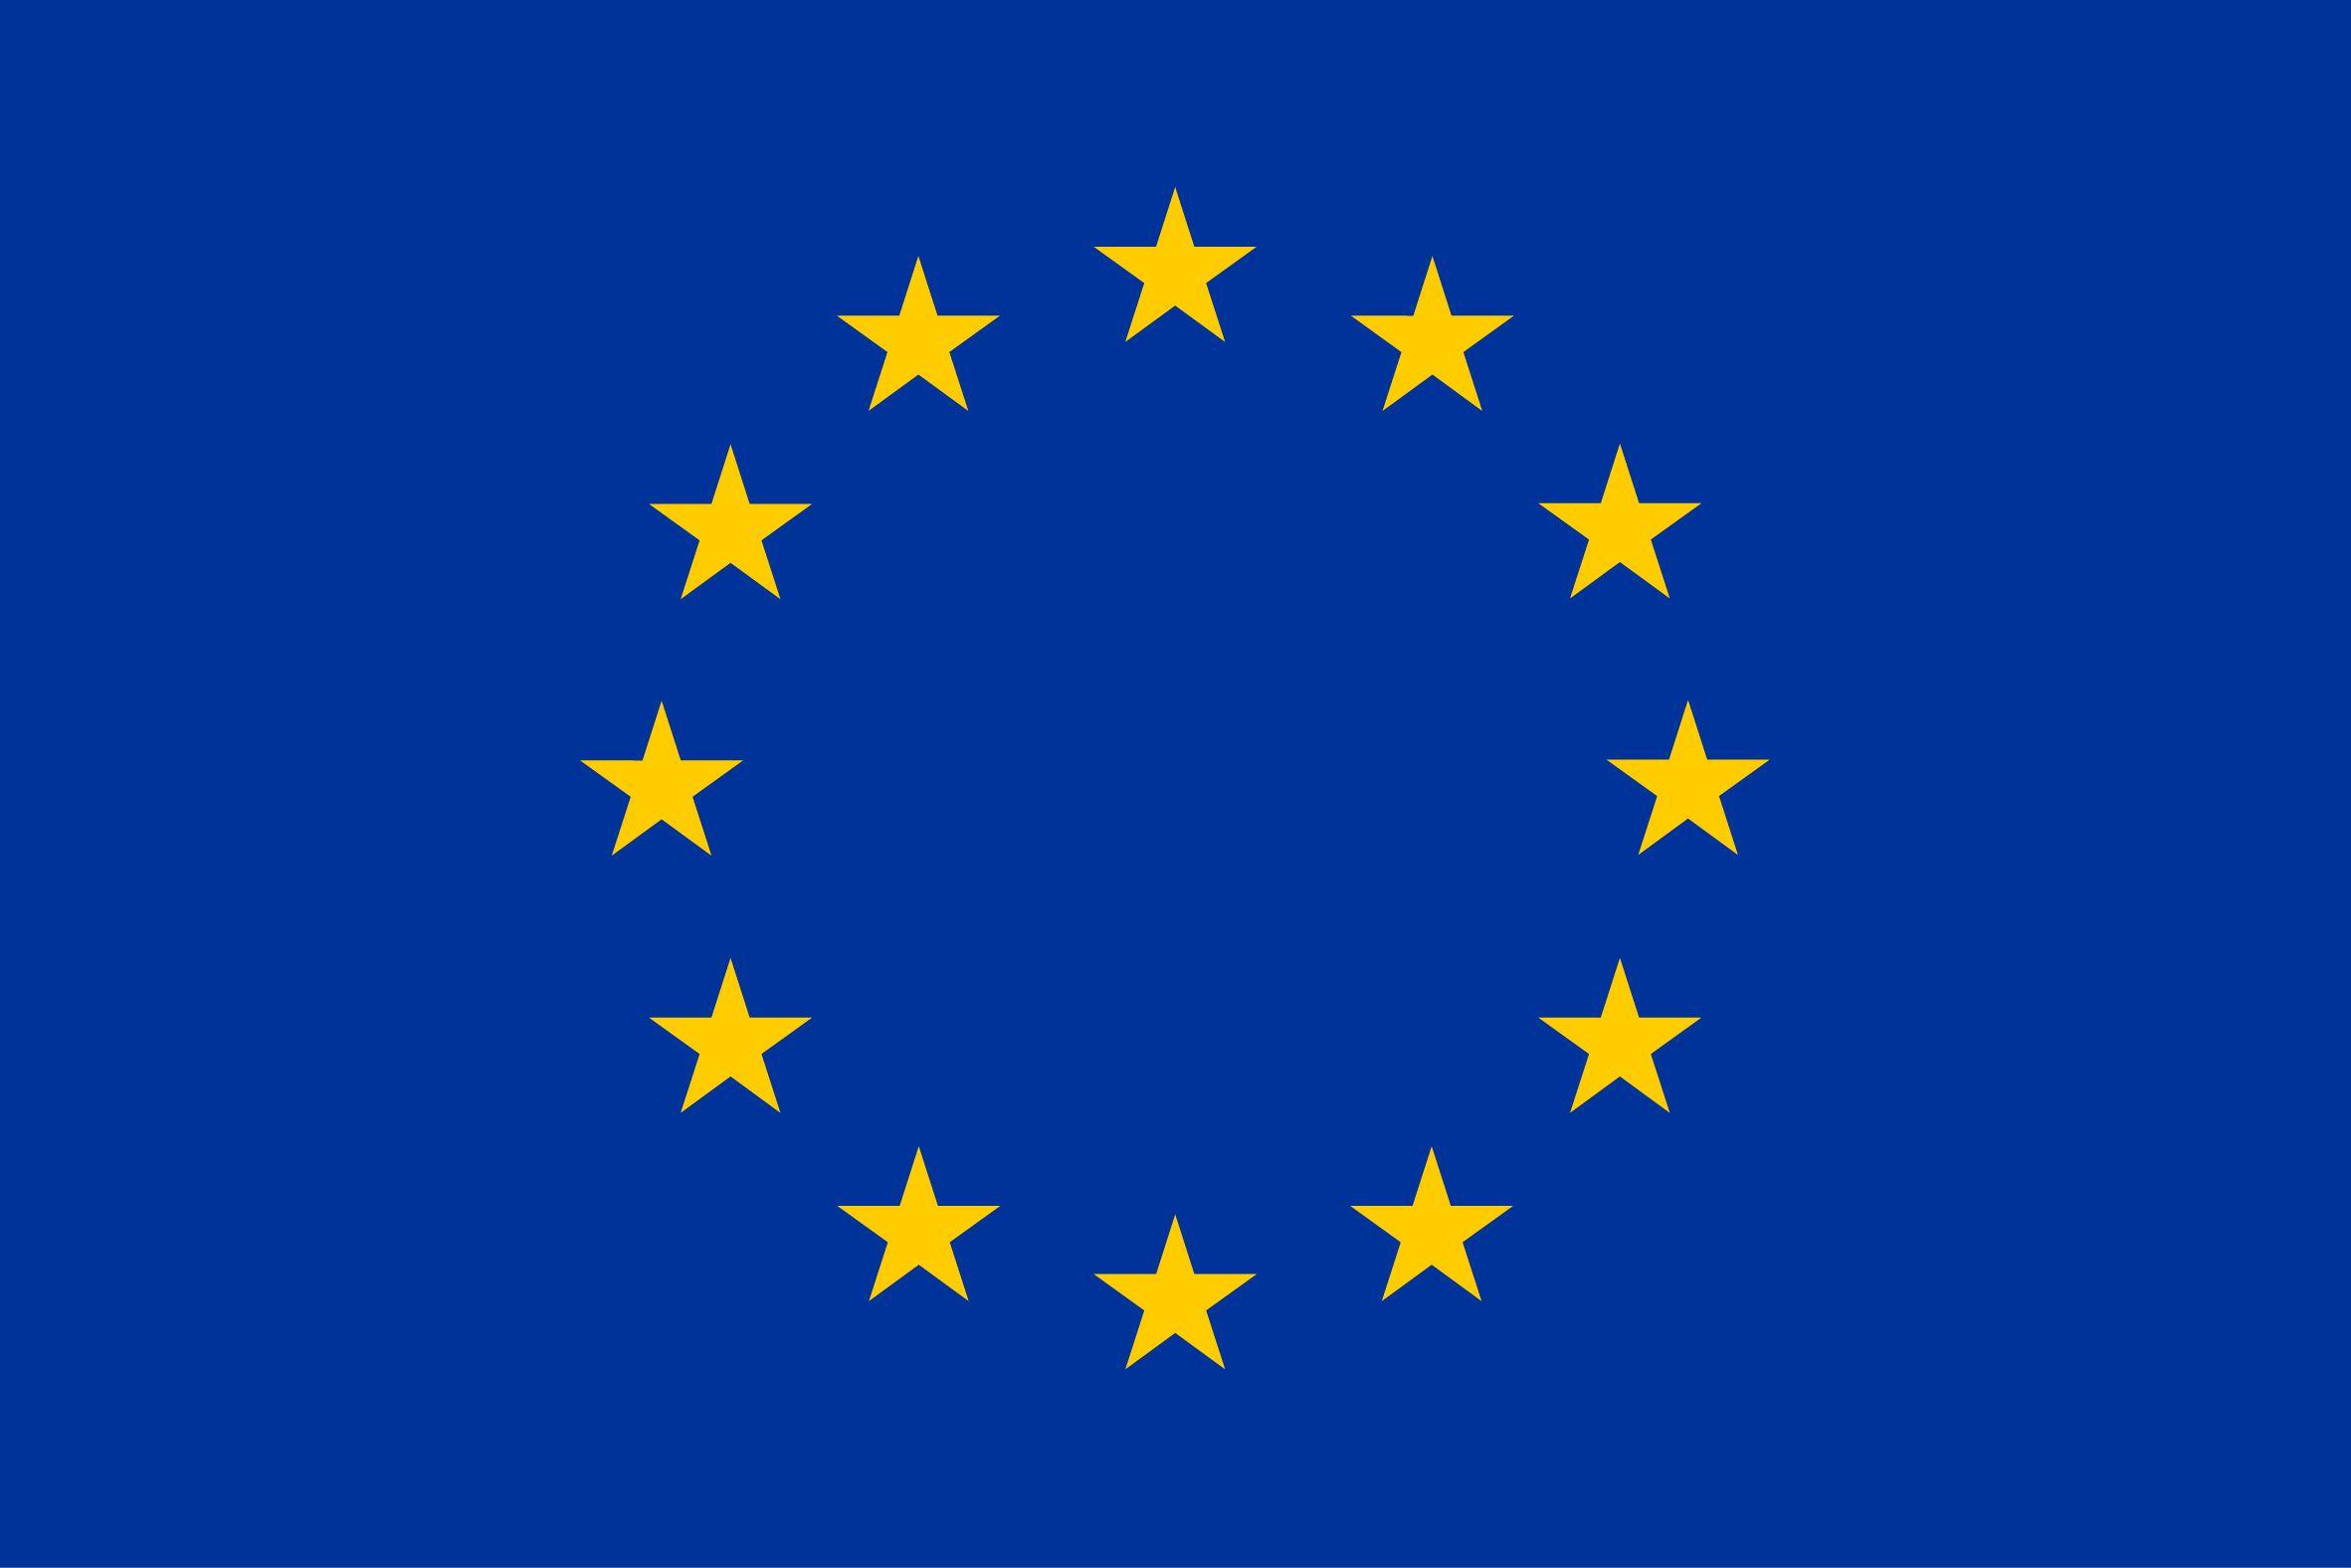 Blue and Yellow Sign Logo - The European flag